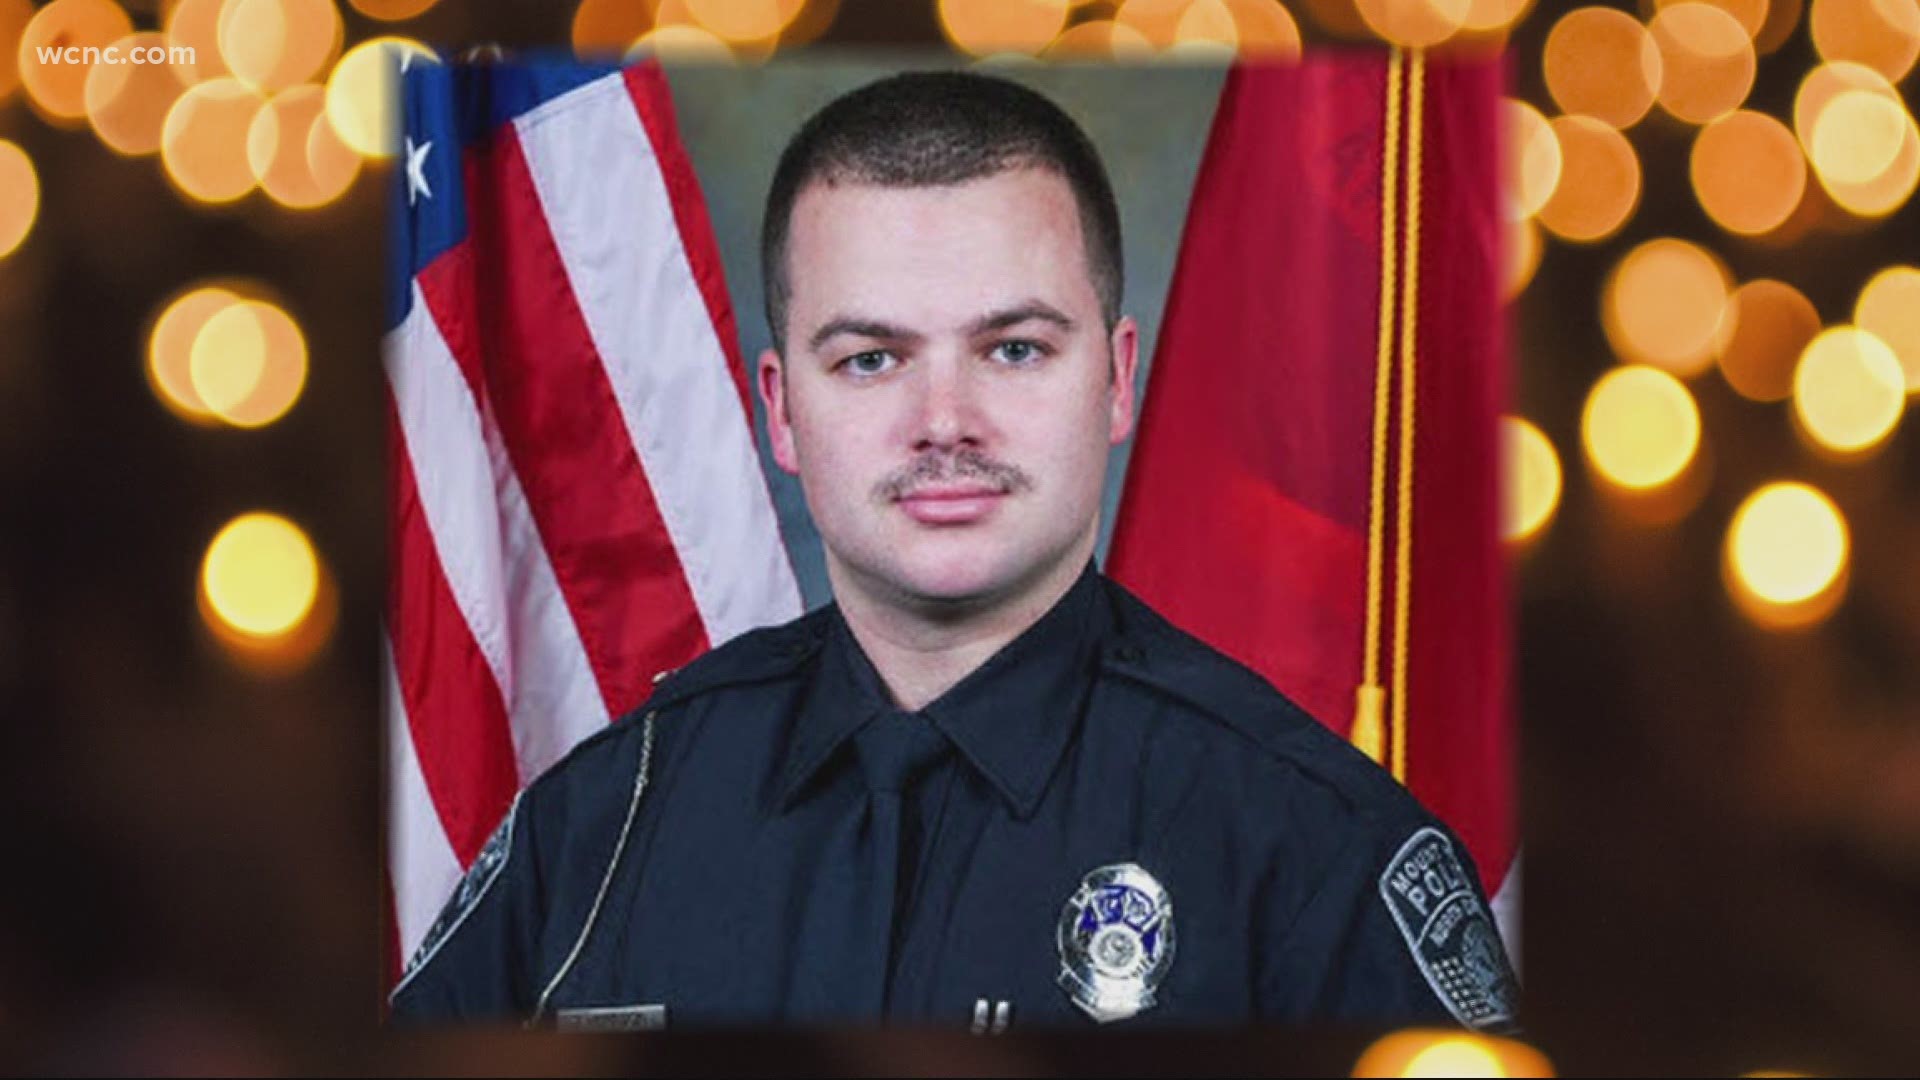 Authorities say Officer Tyler Avery Herndon, 25, was shot and killed while responding to the active break-in at the Mount Holly Car Wash just before 3:30 a.m. Friday